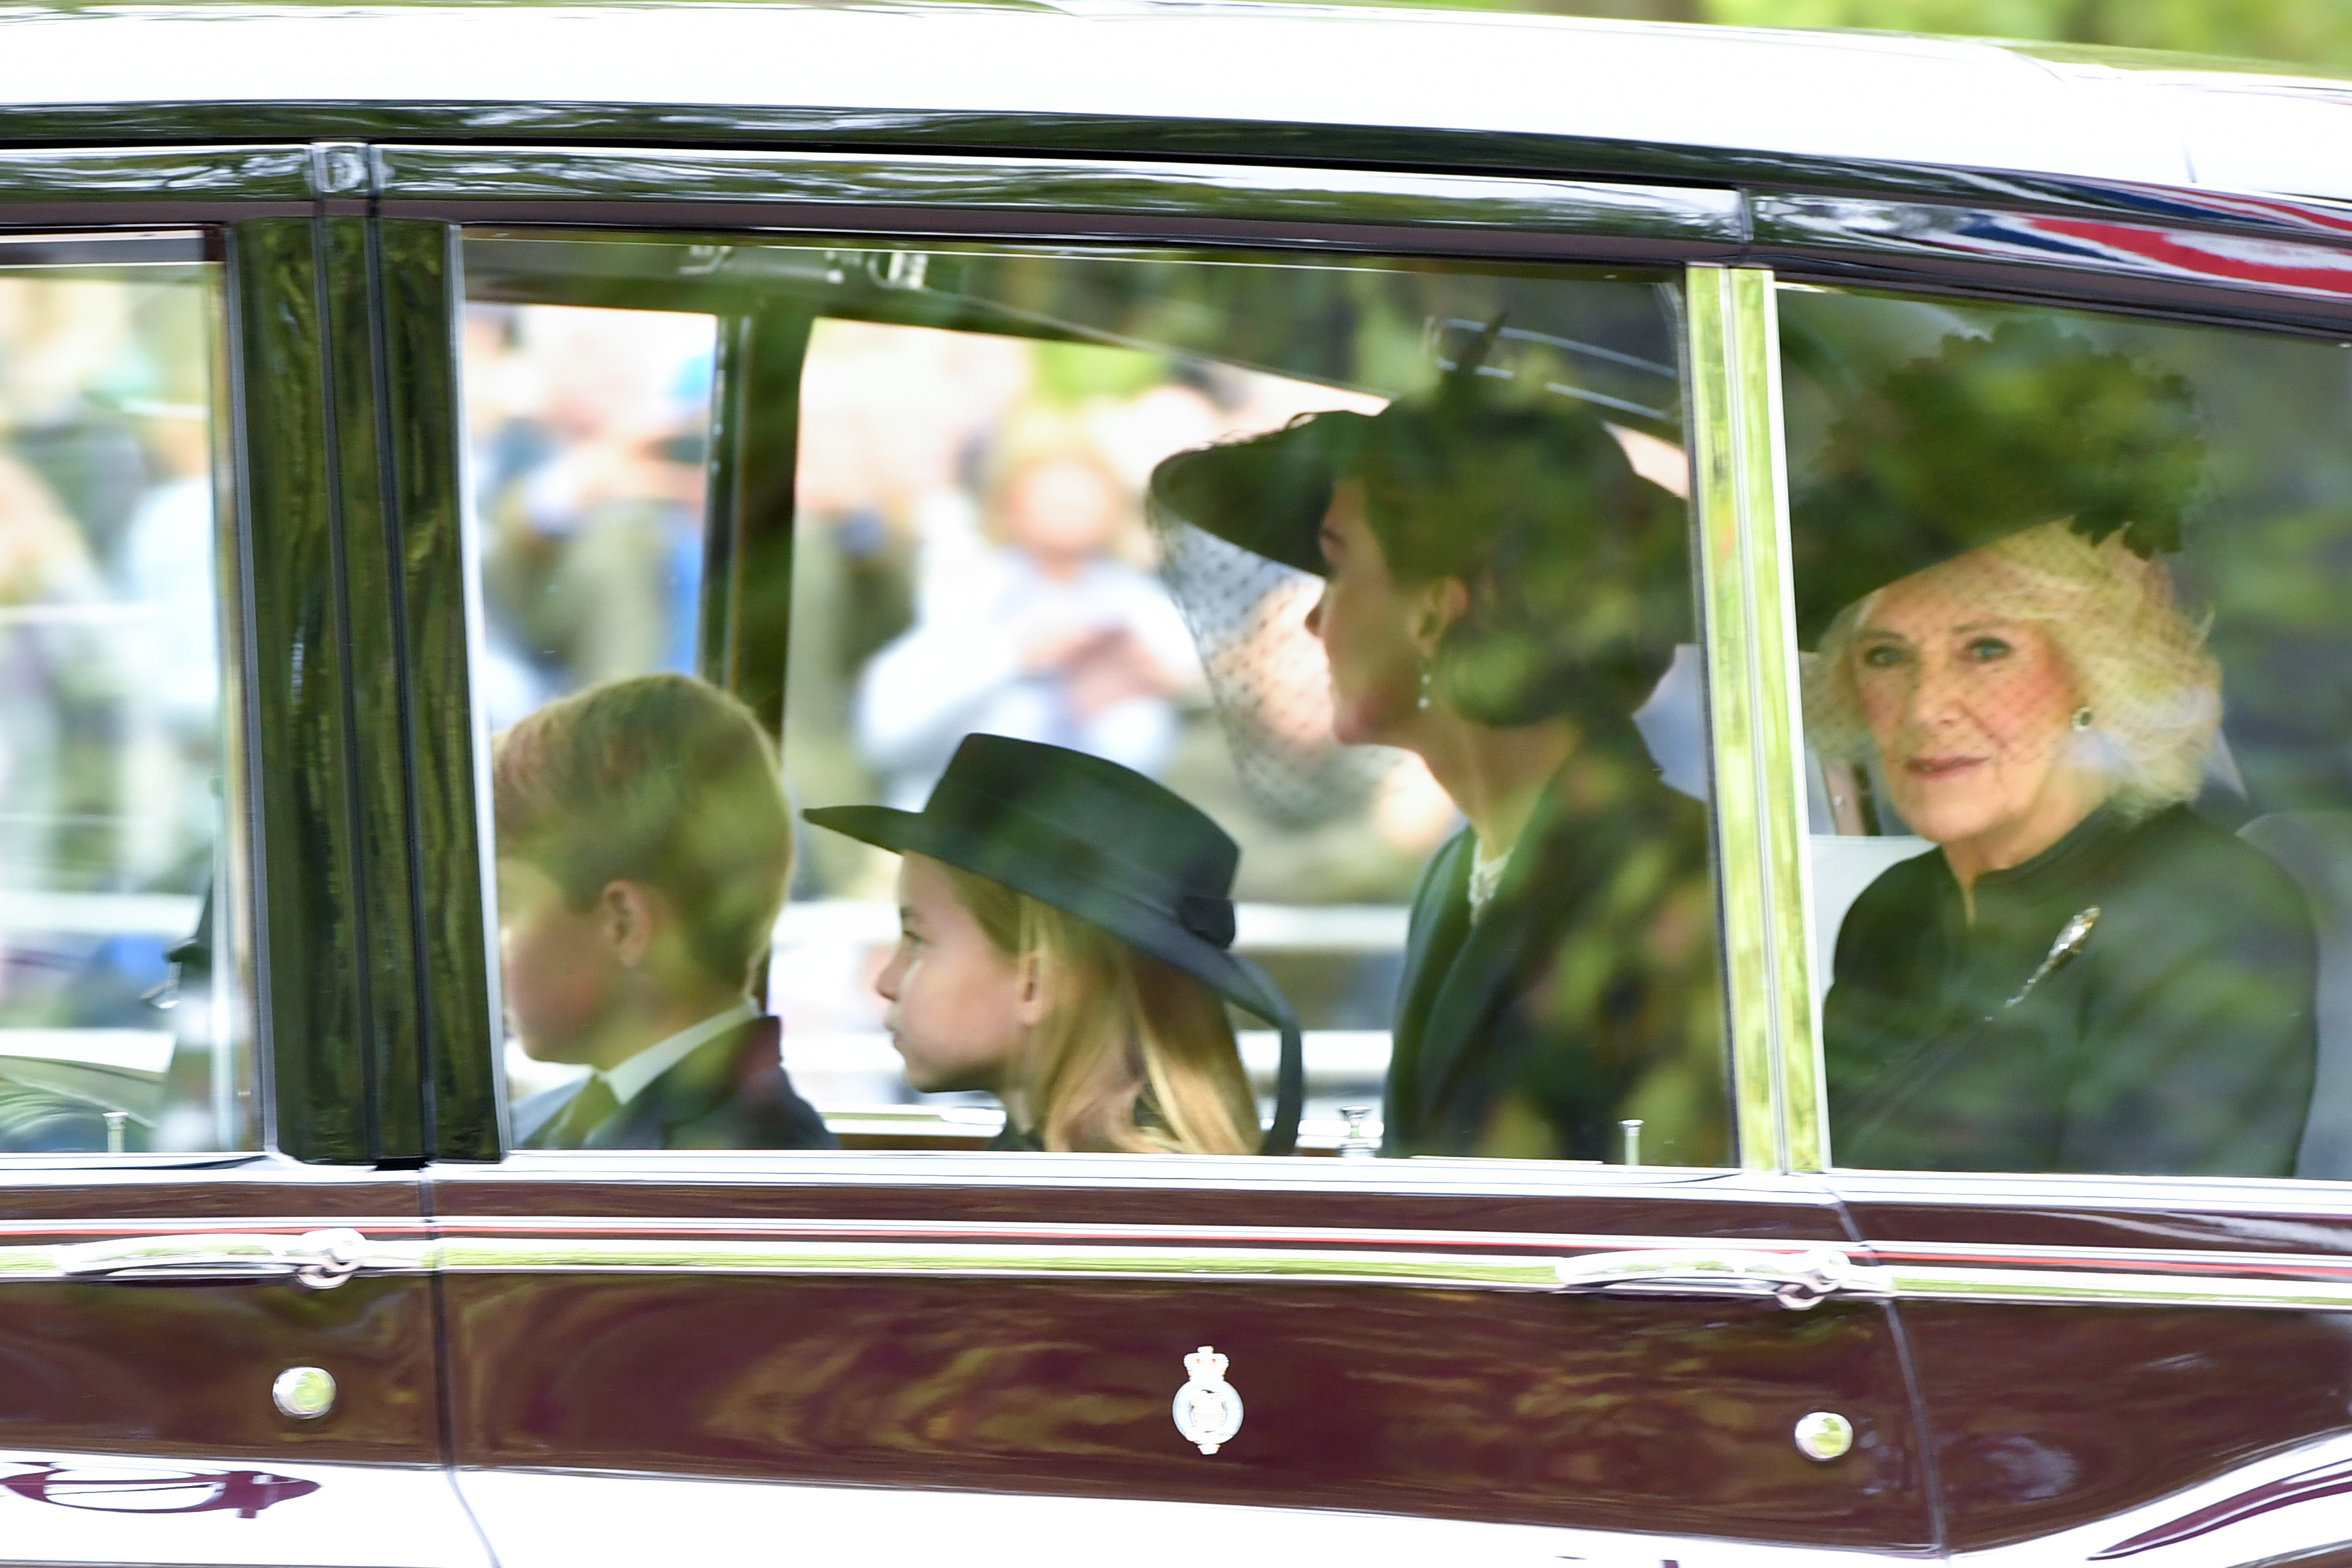 Princess Charlotte, Prince George, the Princess of Wales and the Queen Consort 